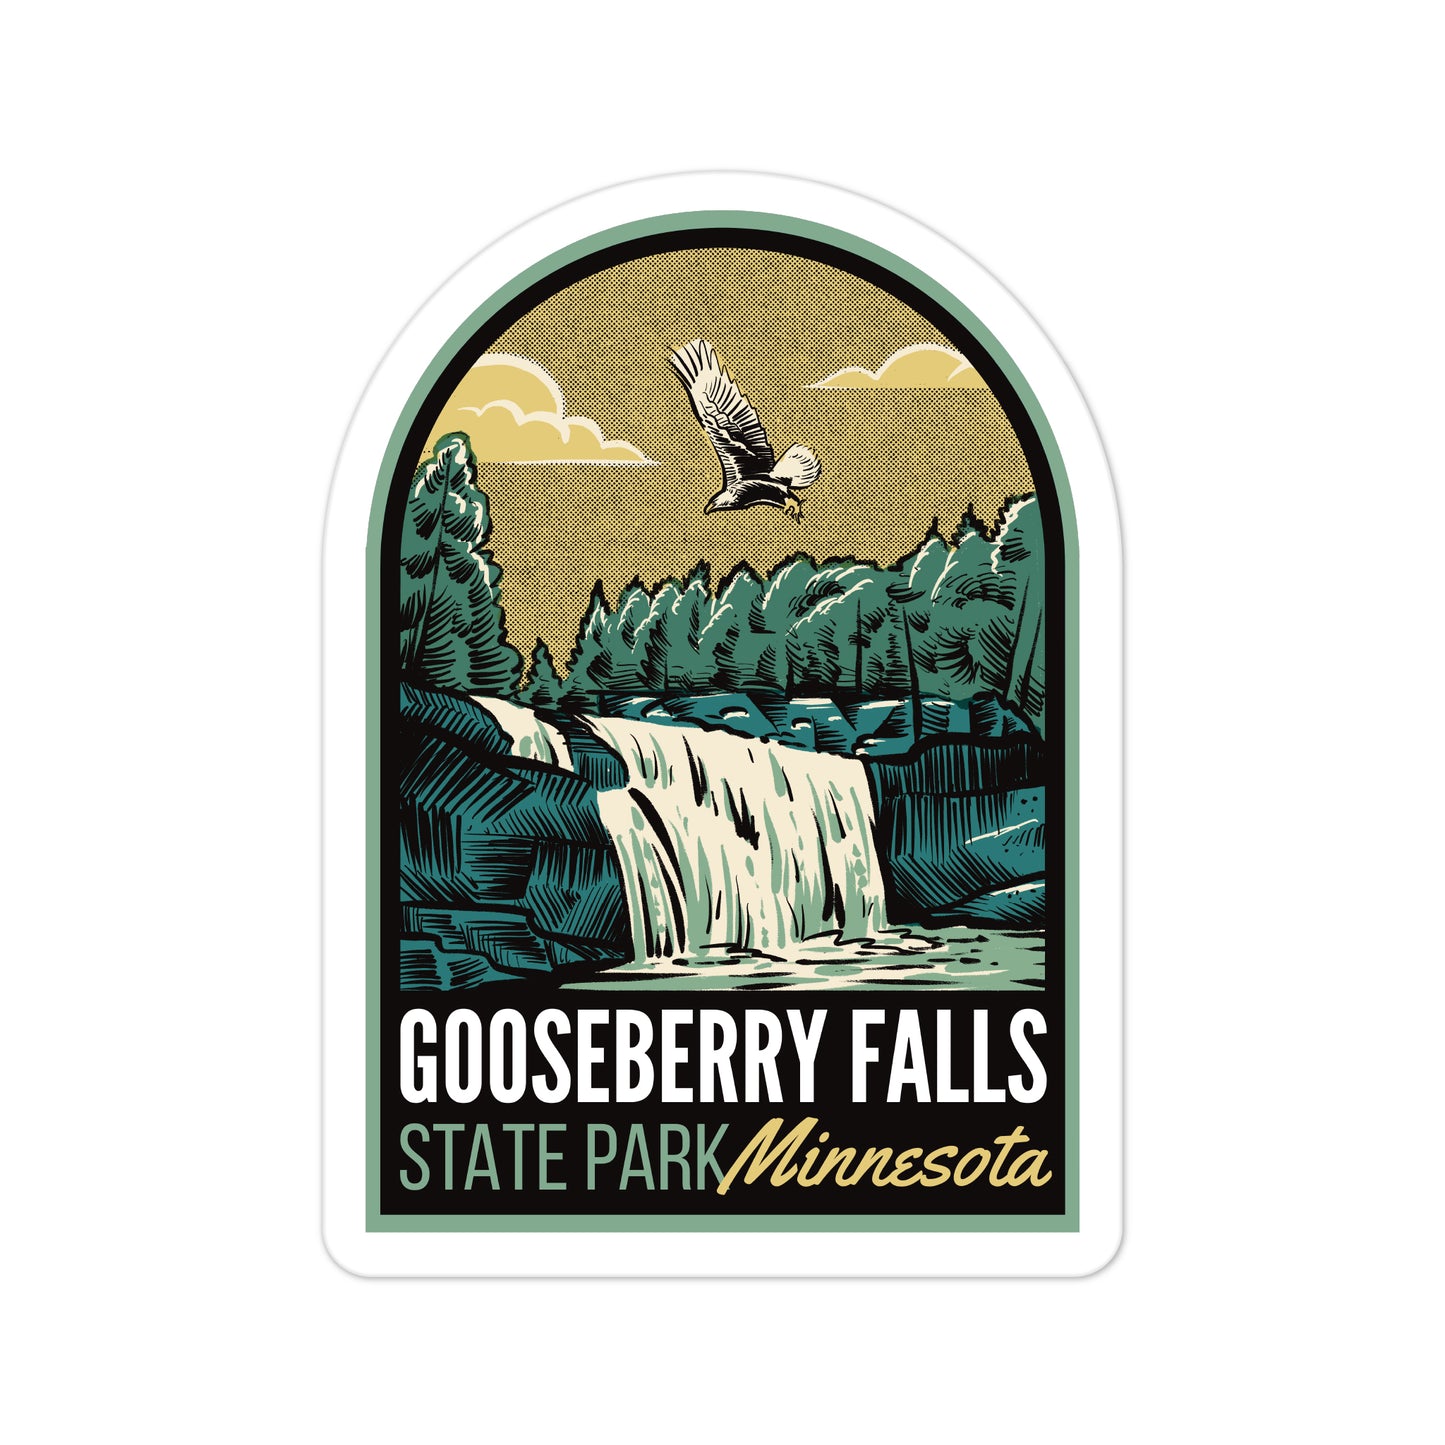 A sticker of Gooseberry Falls State Park